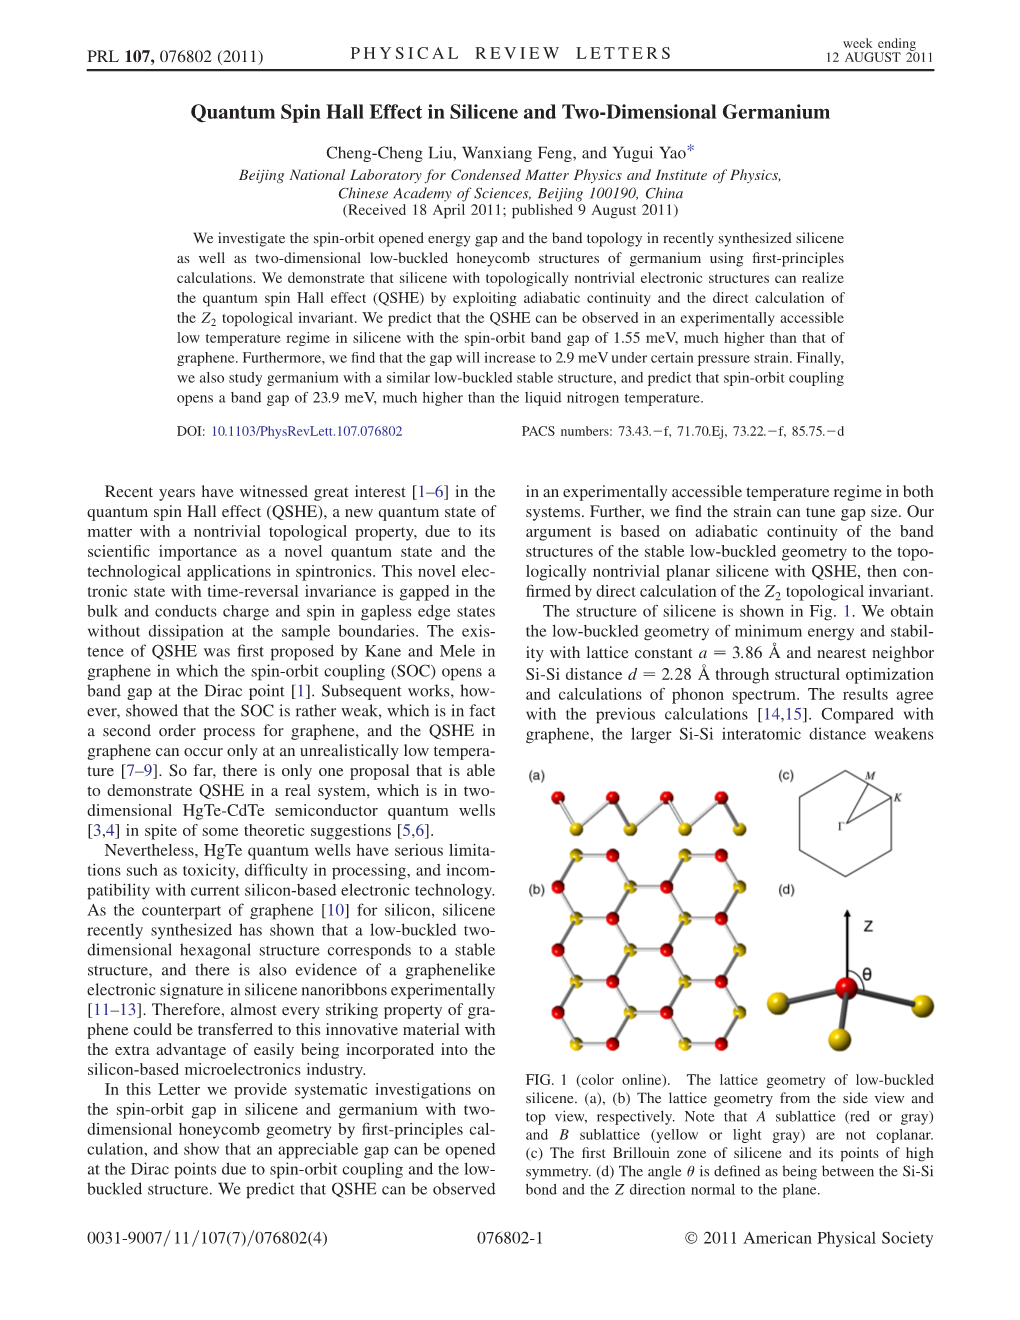 Quantum Spin Hall Effect in Silicene and Two-Dimensional Germanium